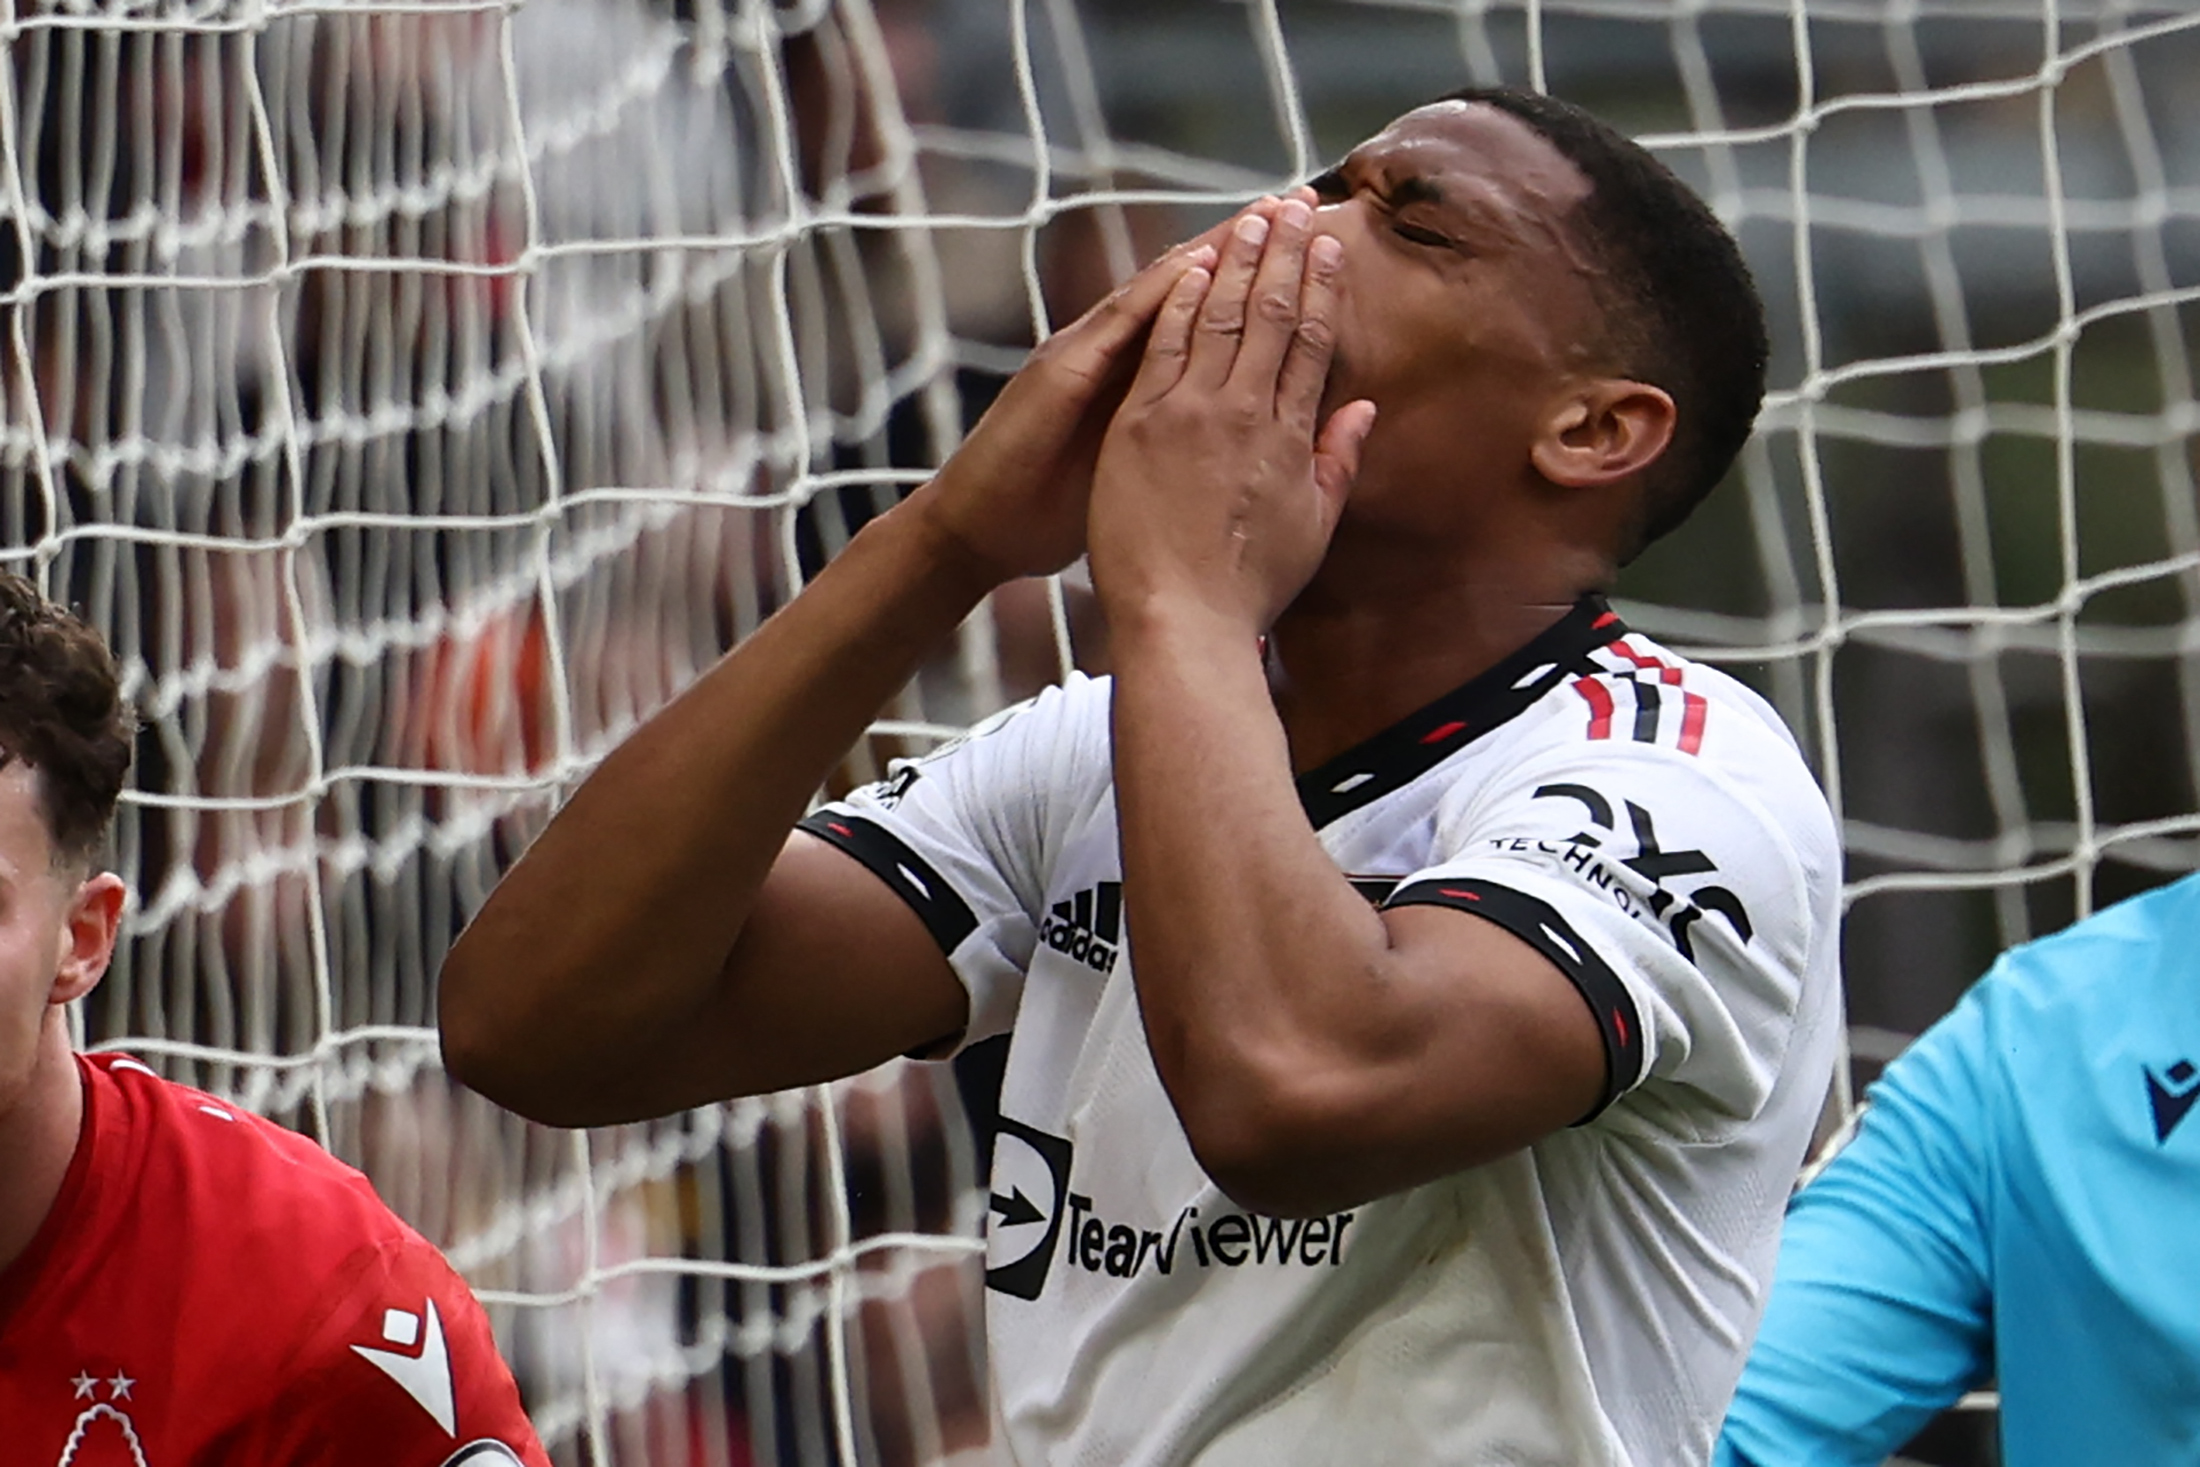 Manchester United striker Anthony Martial expected to spend lengthy spell on sidelines with injury.